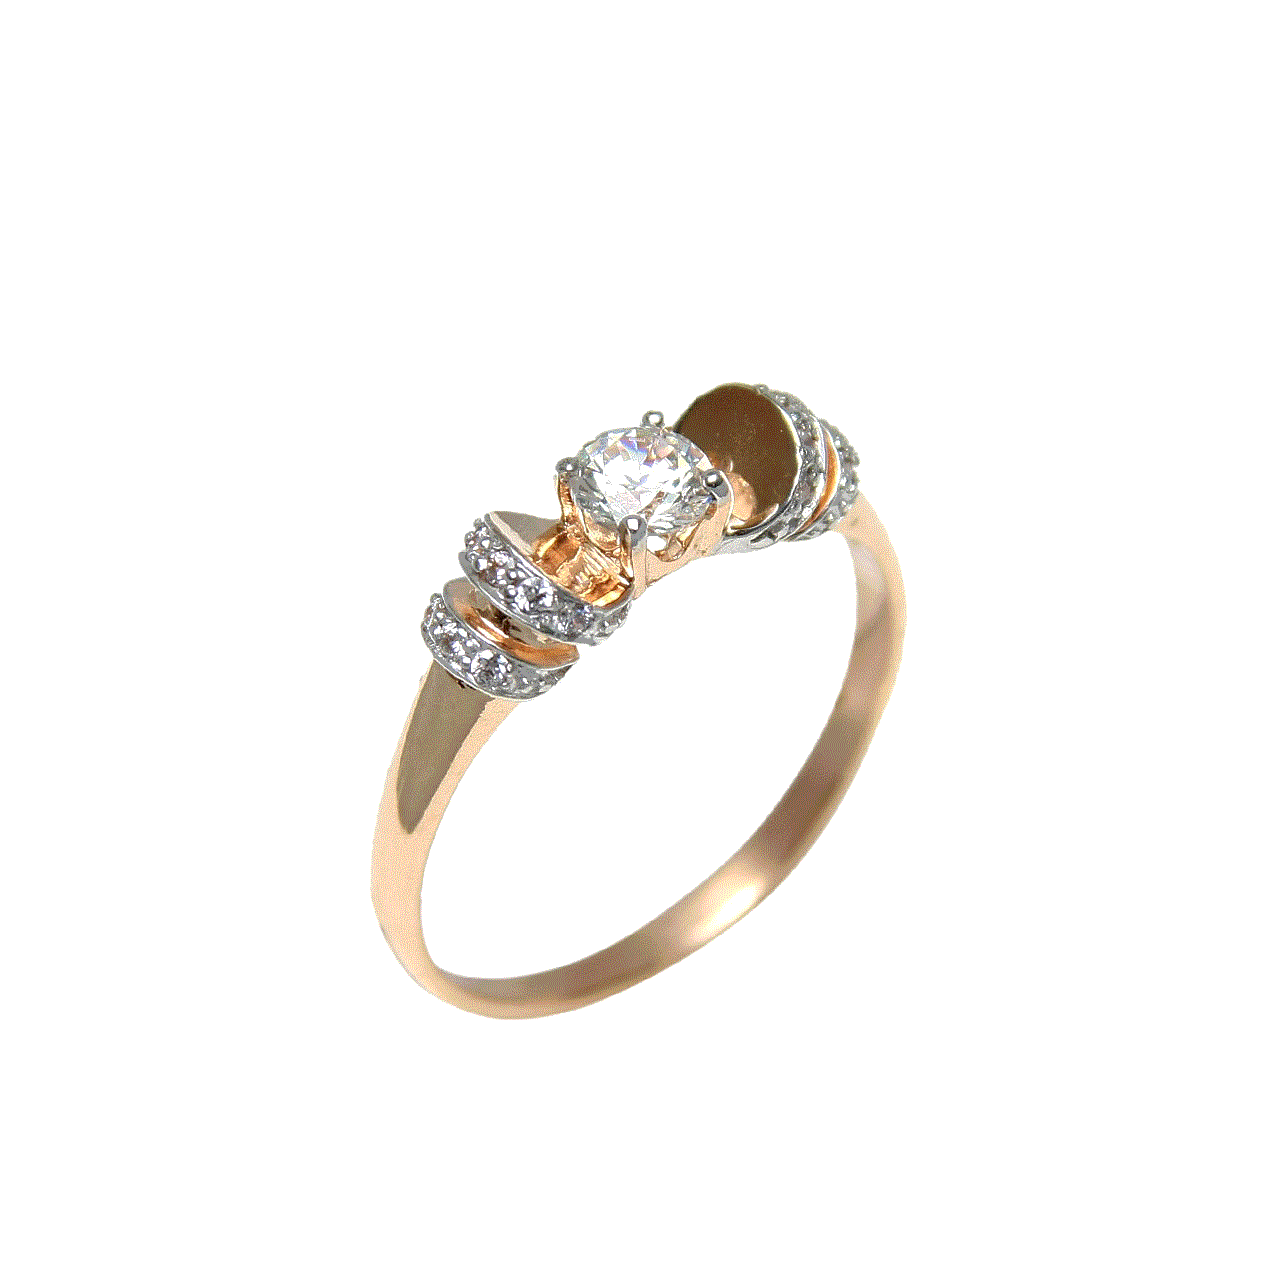  Engagement  and Wedding  Rings  Rose  gold  CZ  engagement  